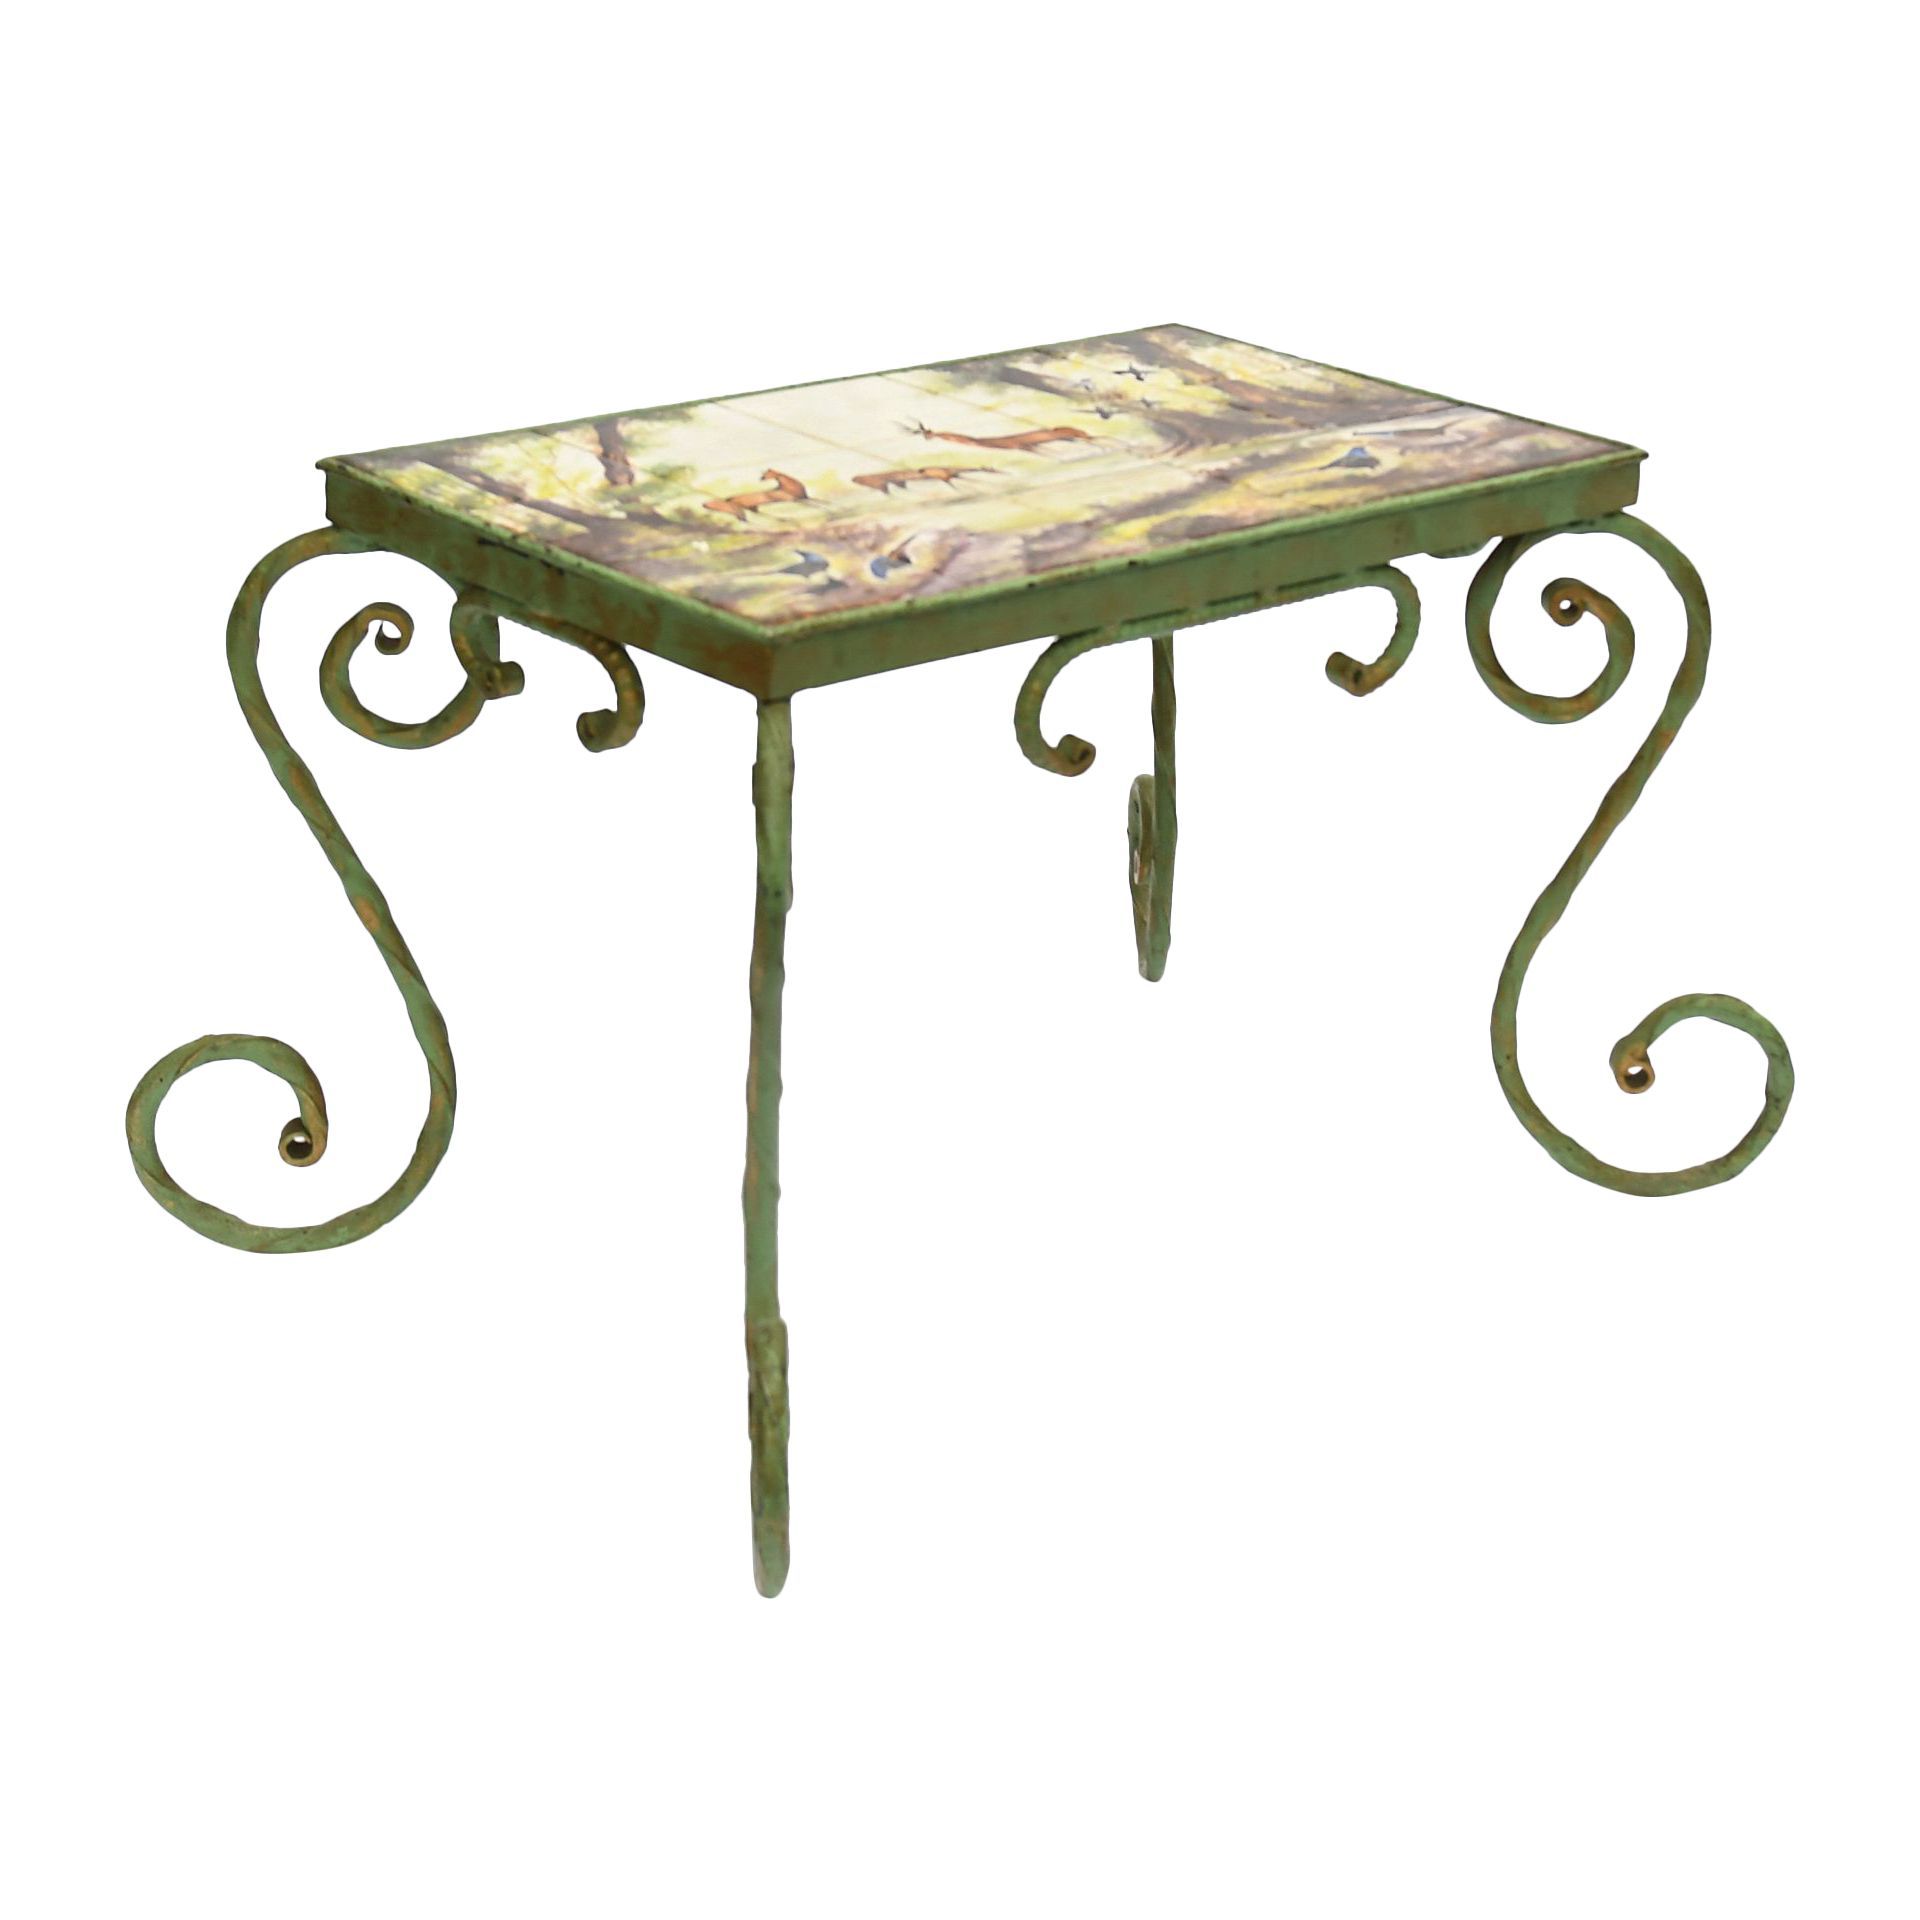 Wrought Iron Coffee Table With Ceramic Tile Top – Coffee Tables | Antikeo Throughout Iron Coffee Tables (View 6 of 15)